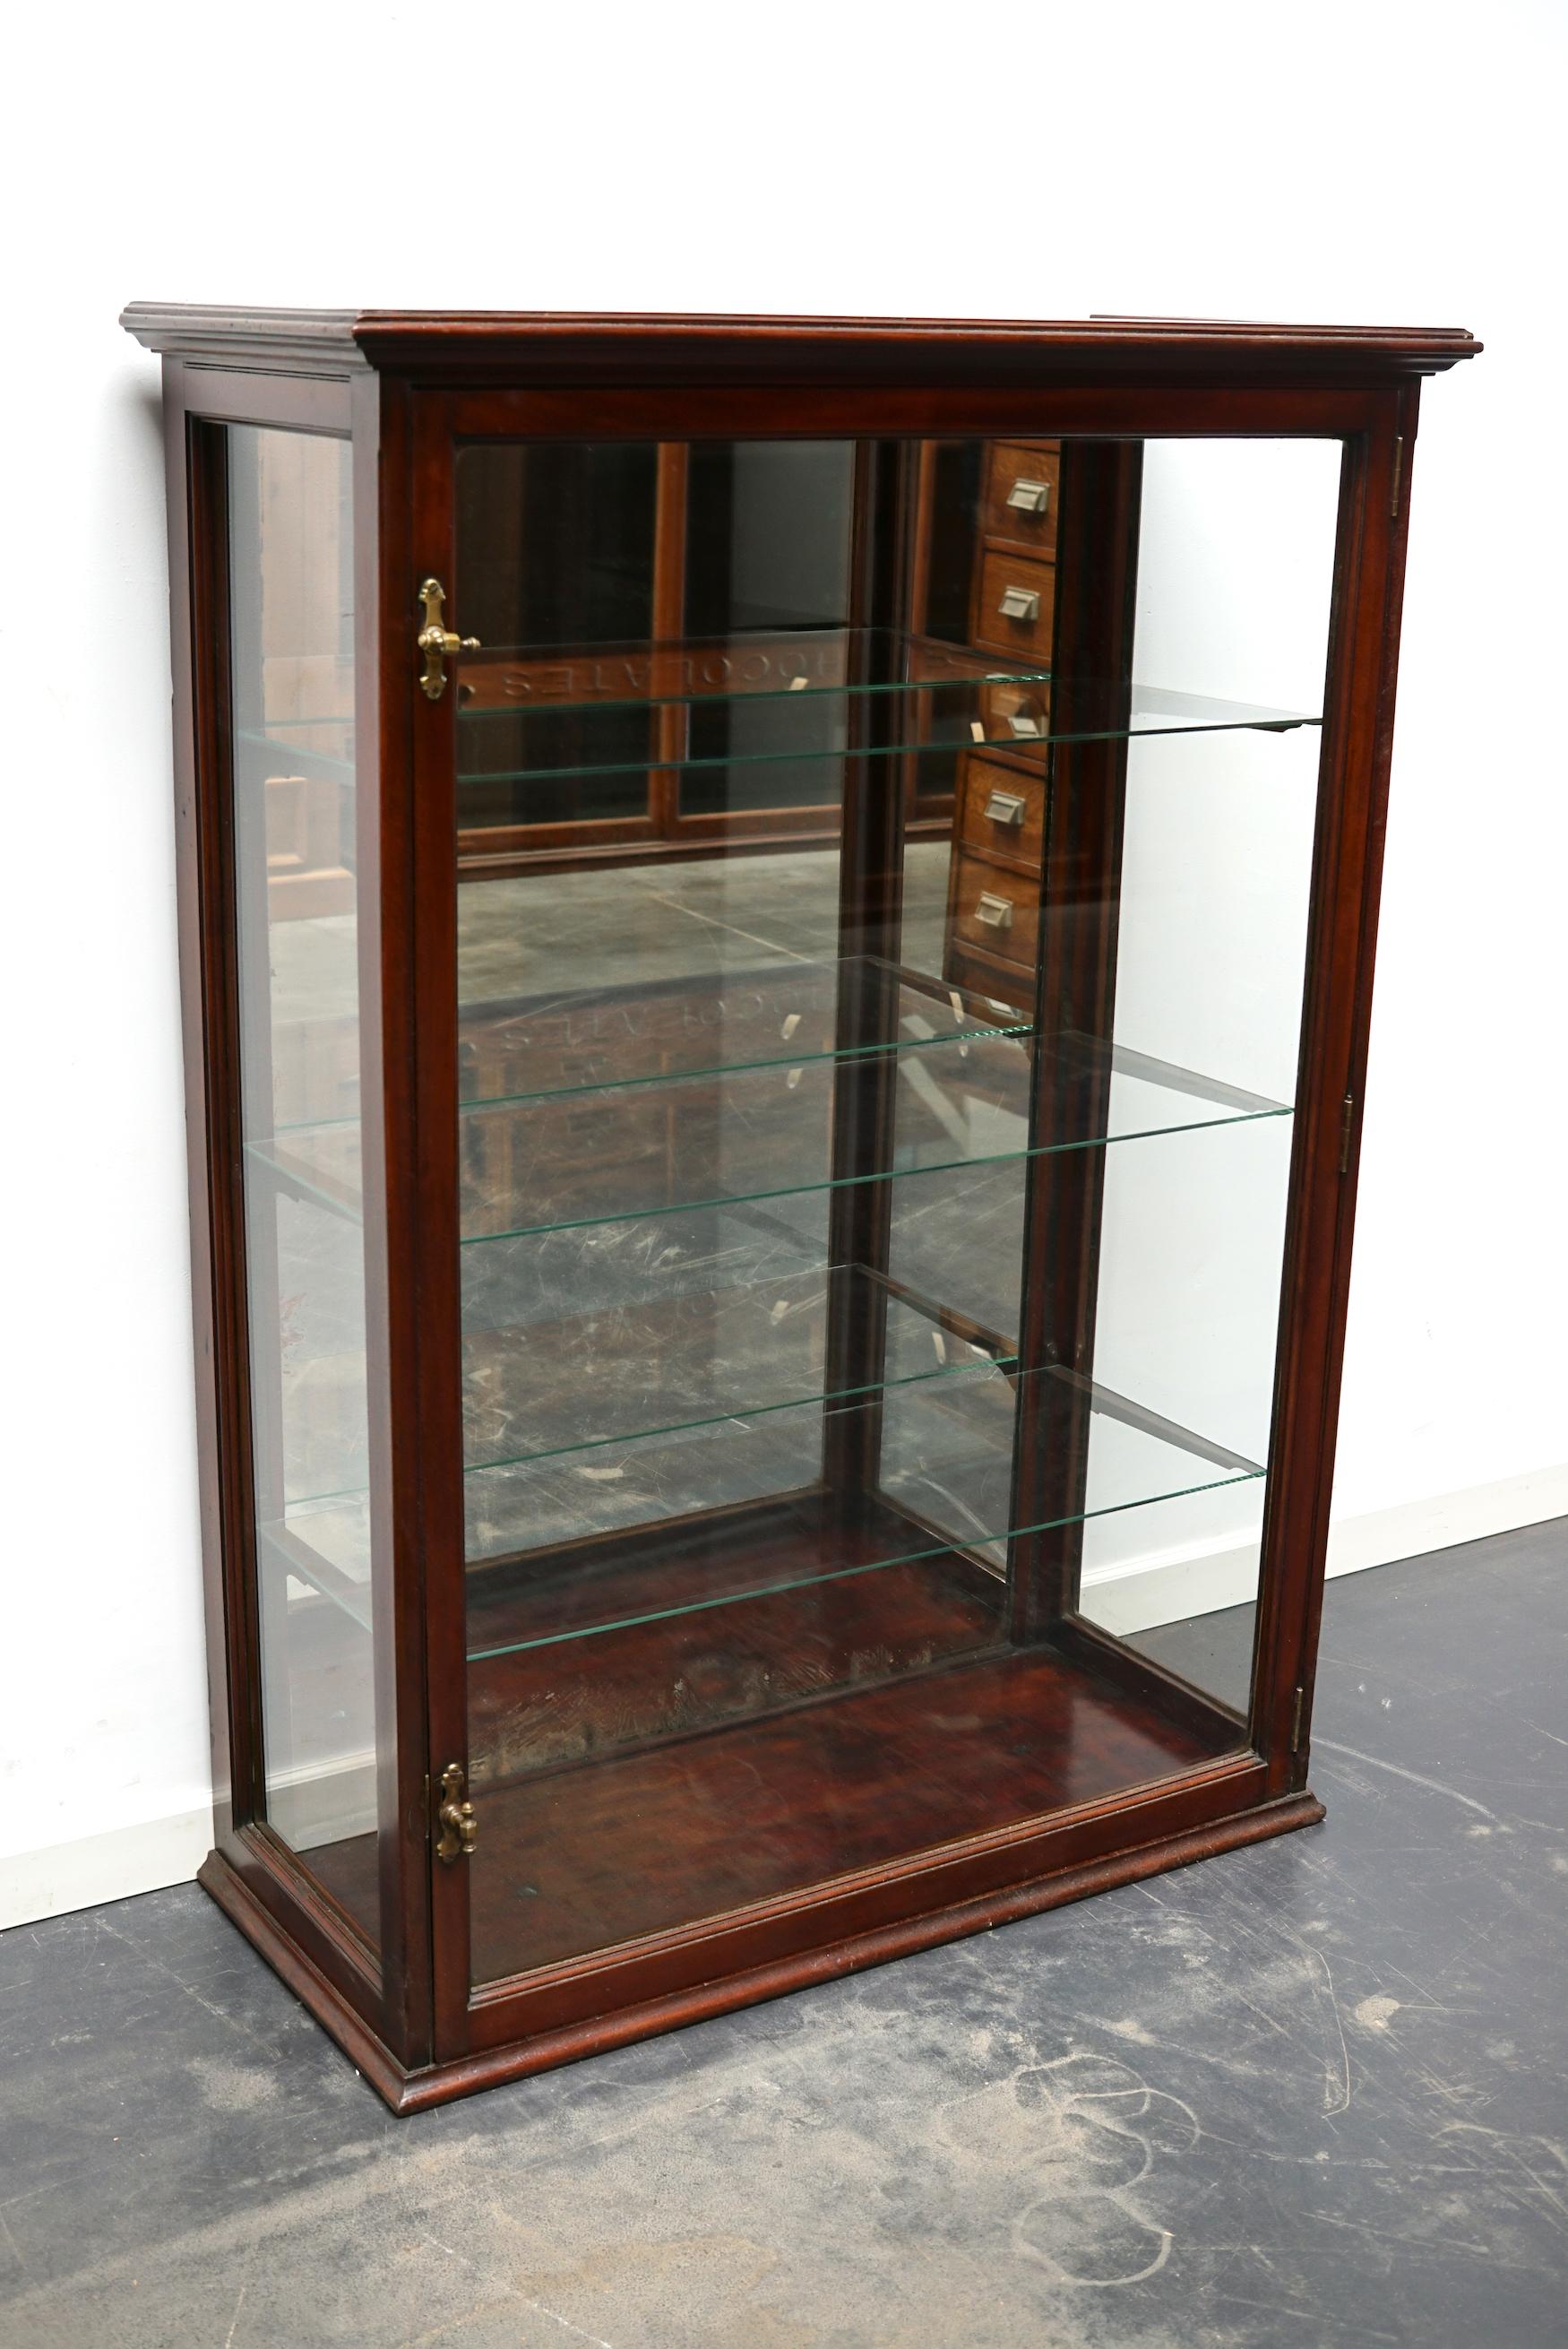 A museum quality Victorian mahogany display cabinet. This outstanding cabinet has a glass door fitted with original brass knob handles. It features three shelves on cast iron shelve holders and slightly foxed mirrored back.